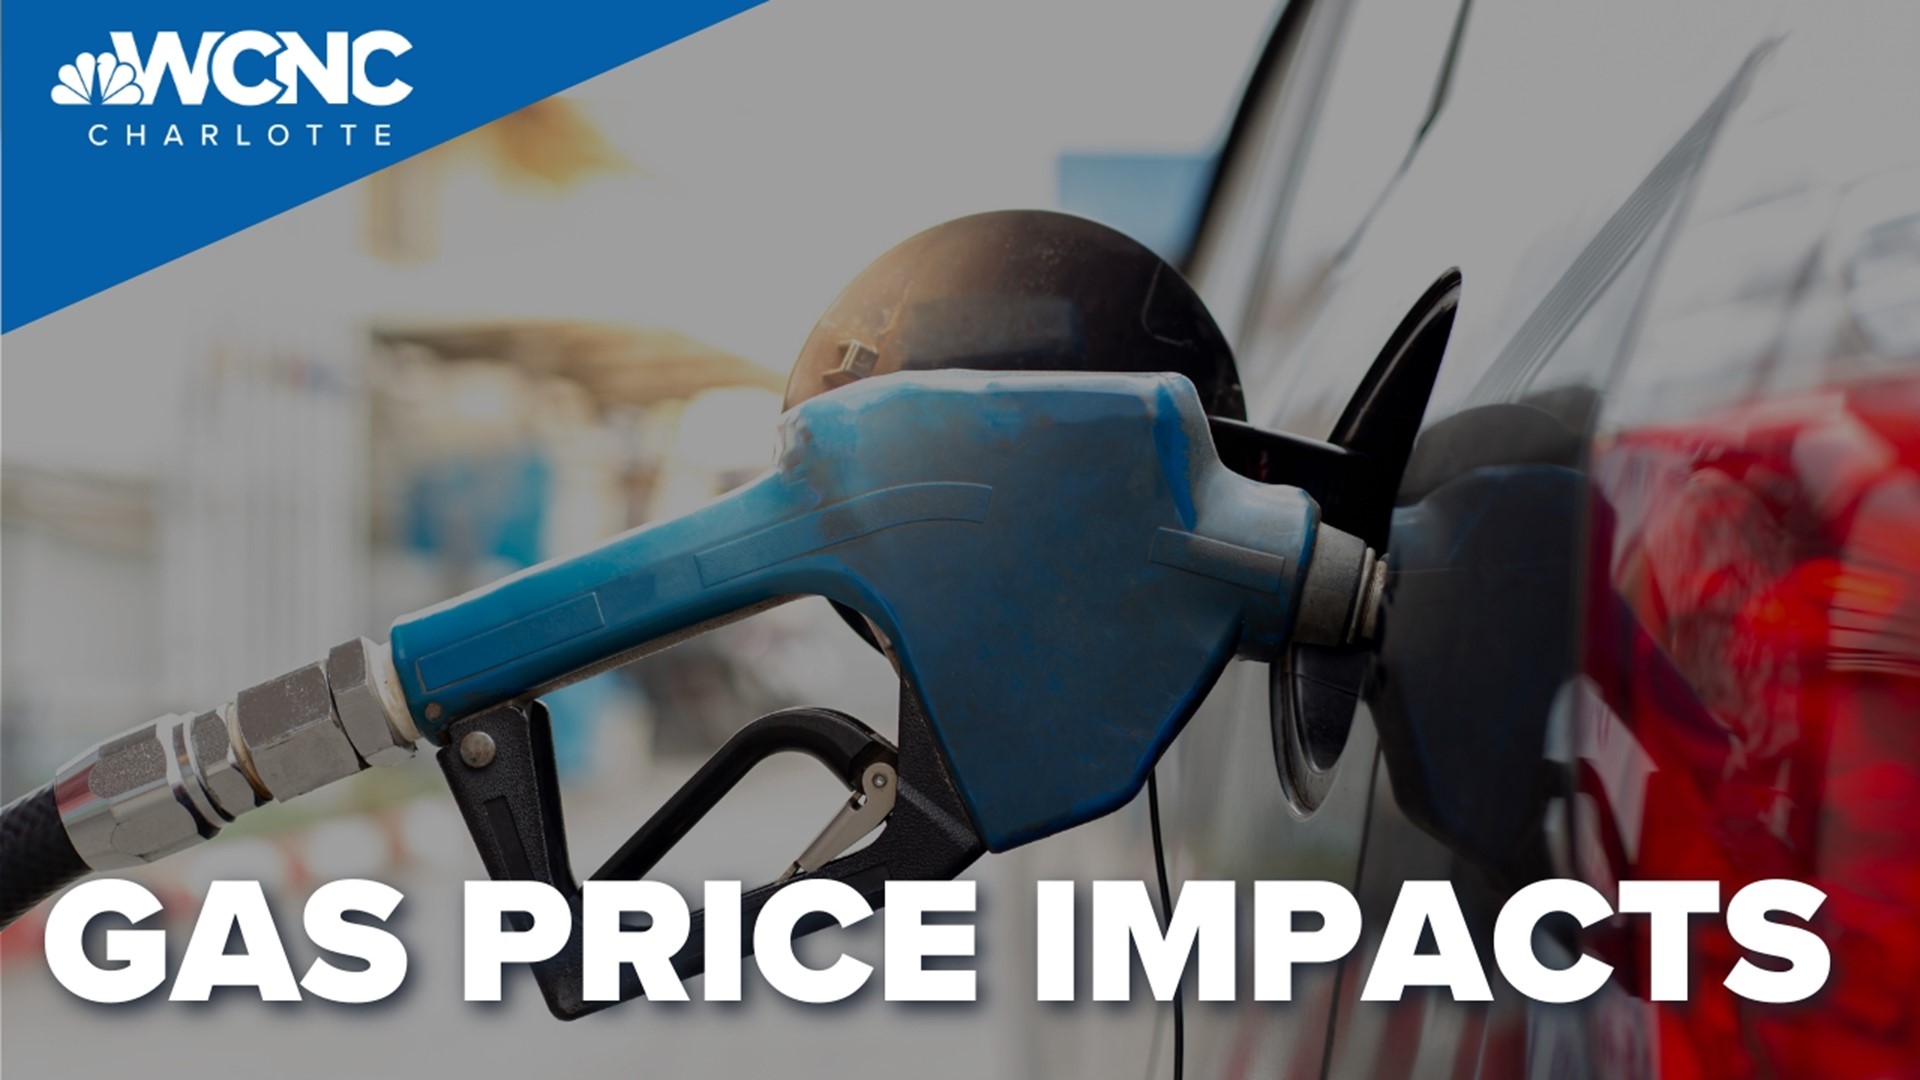 No relief at the pump just yet. North Carolina continues to see record high prices for gas and according to experts you can expect those numbers to continue to rise.